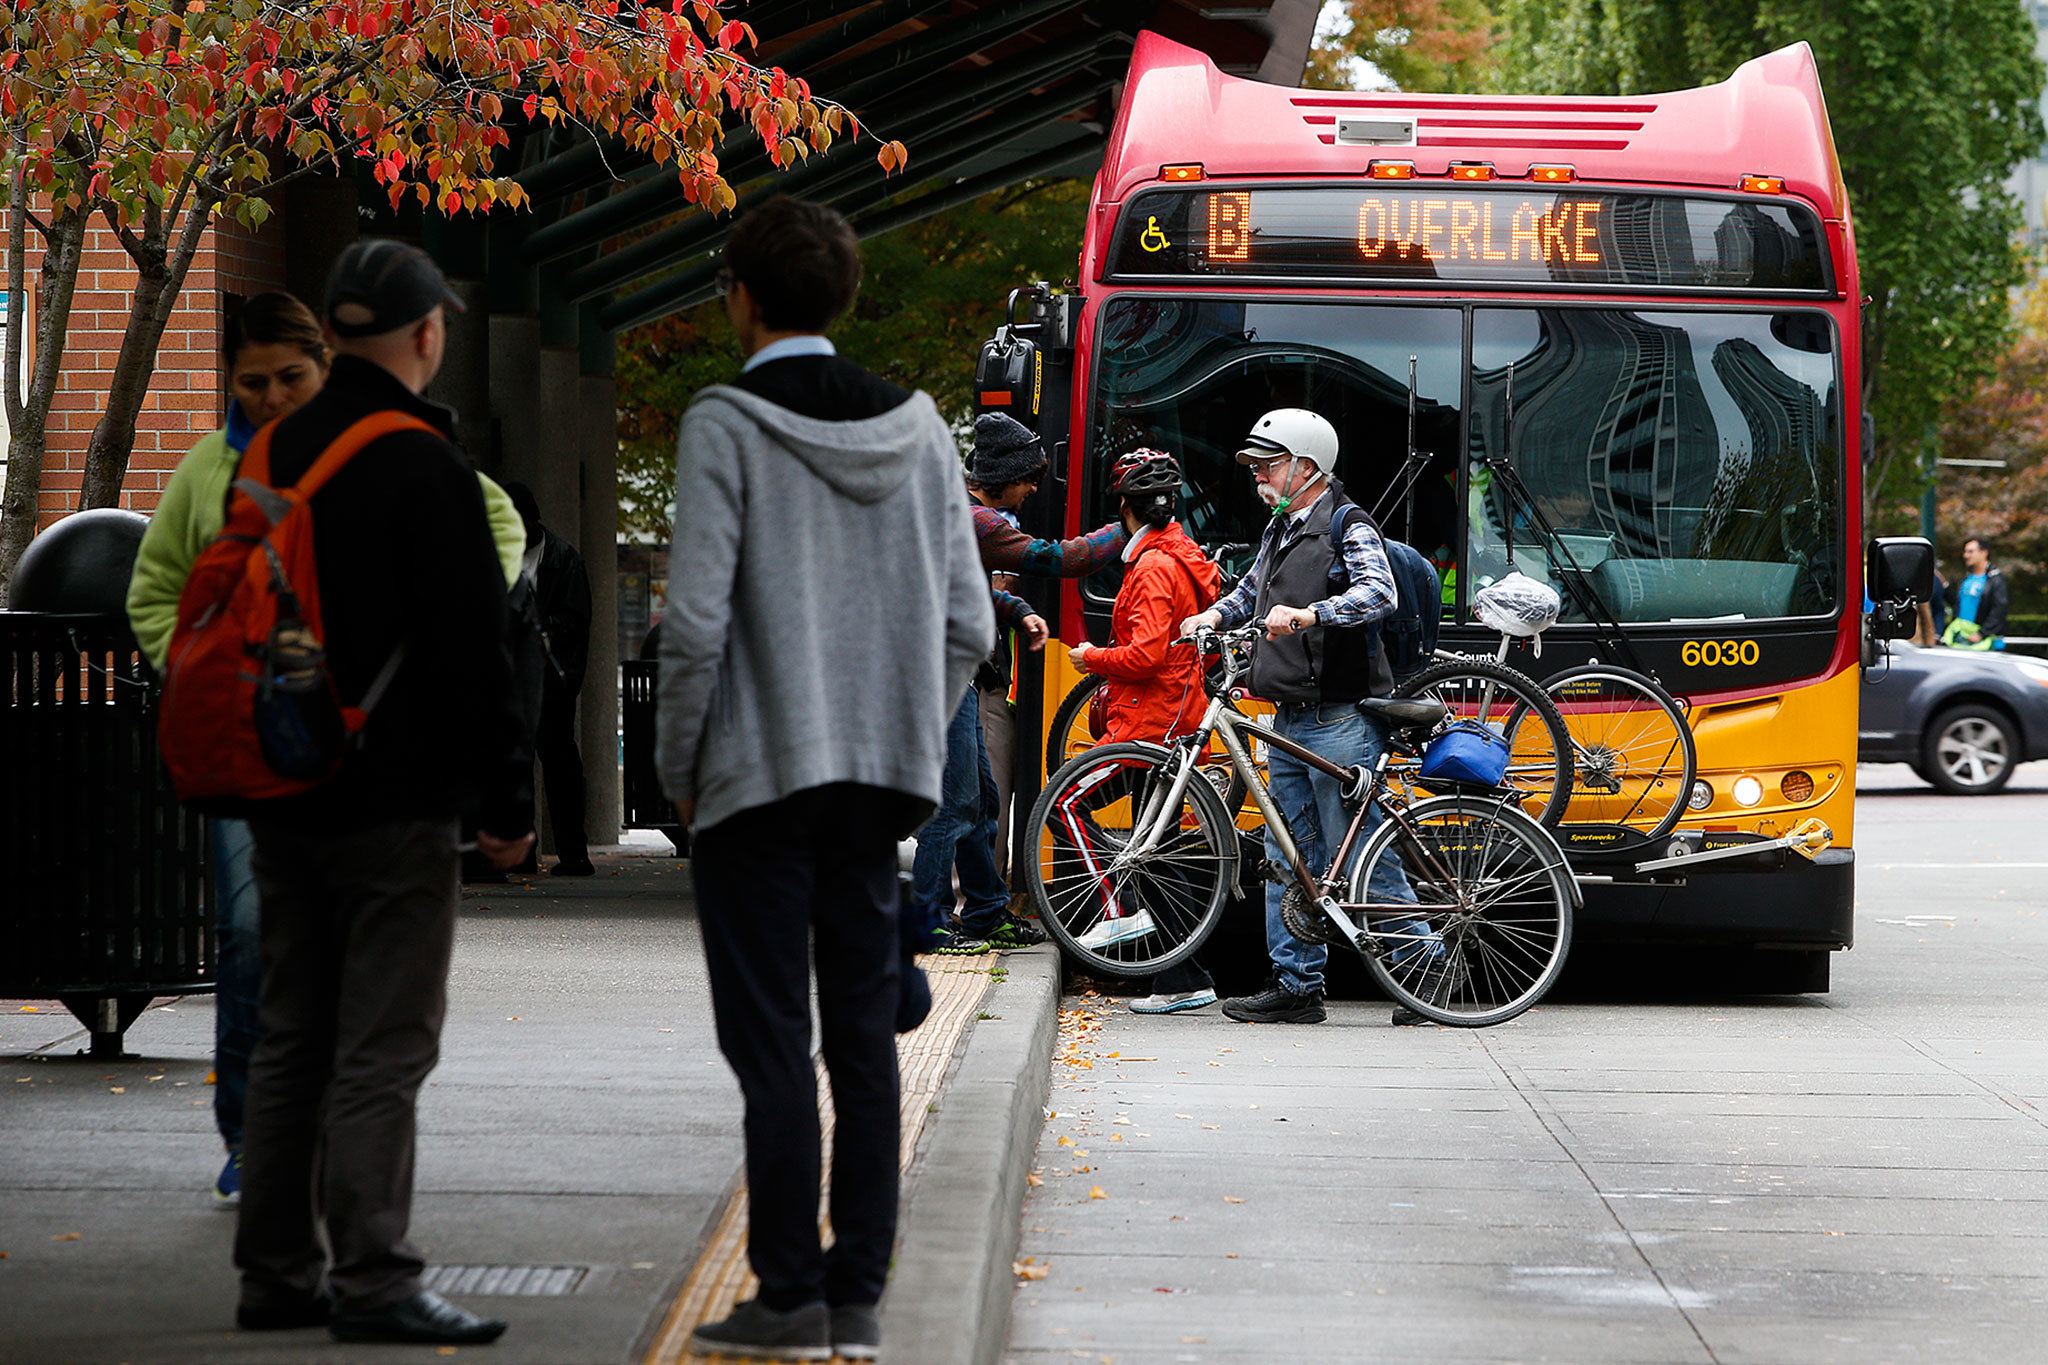 The RapidRide B Line bus at the Bellevue Transit Center. (Ian Terry / The Herald)